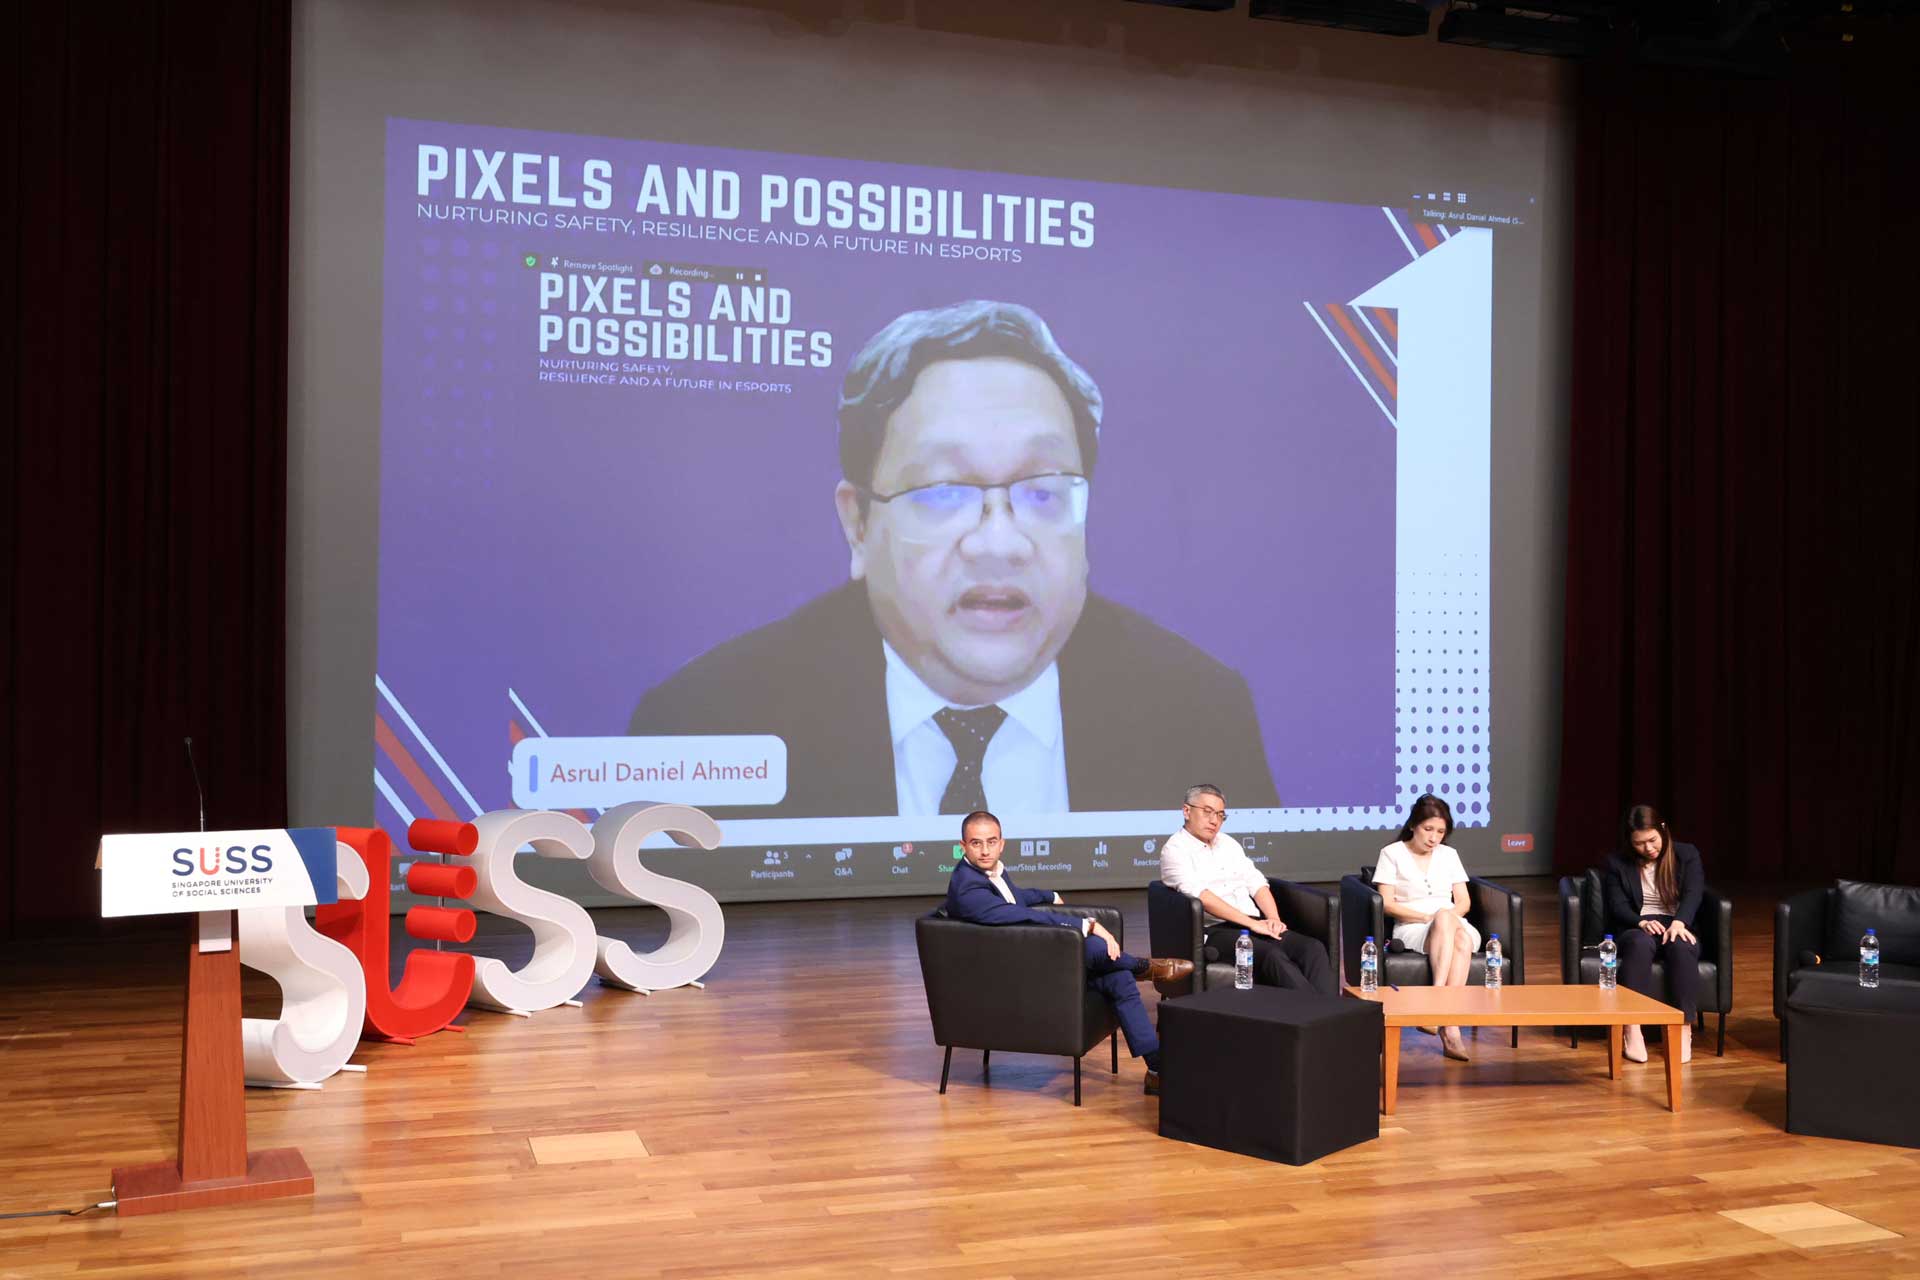 05-Pixels-and-Possibilities-Panel-Discussion-02-019